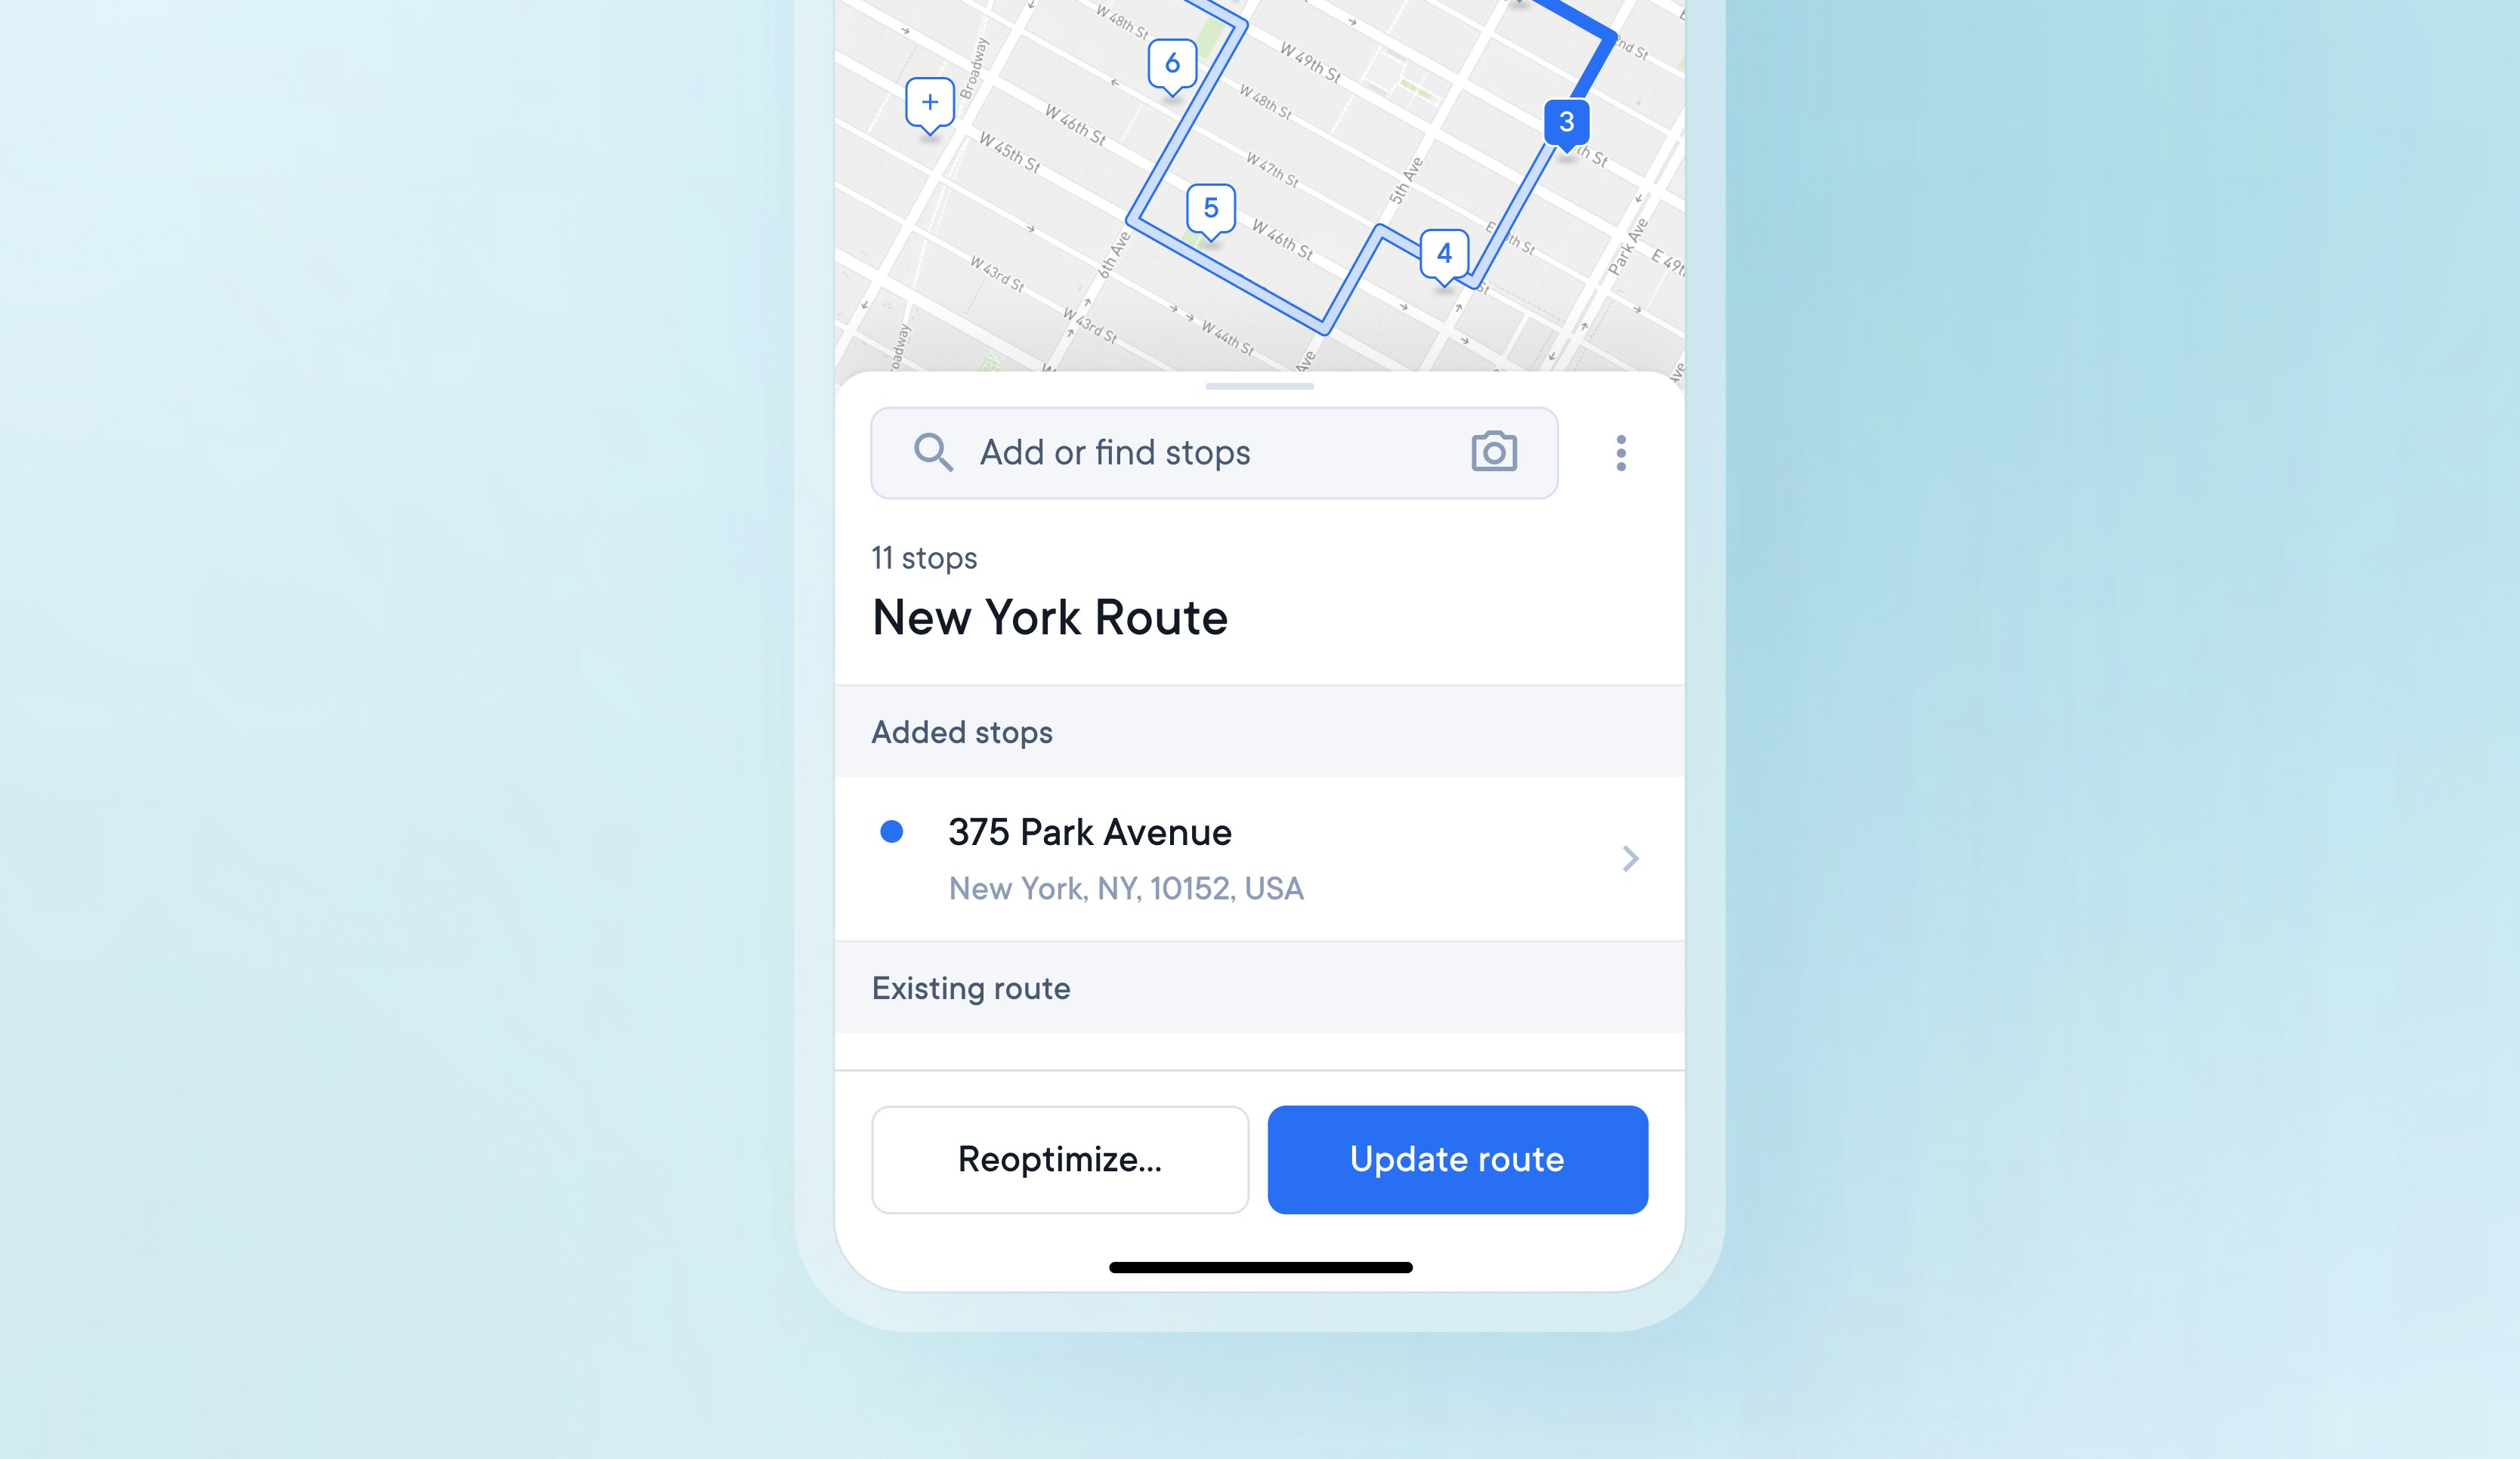 Preview changes to your delivery route before you make them.